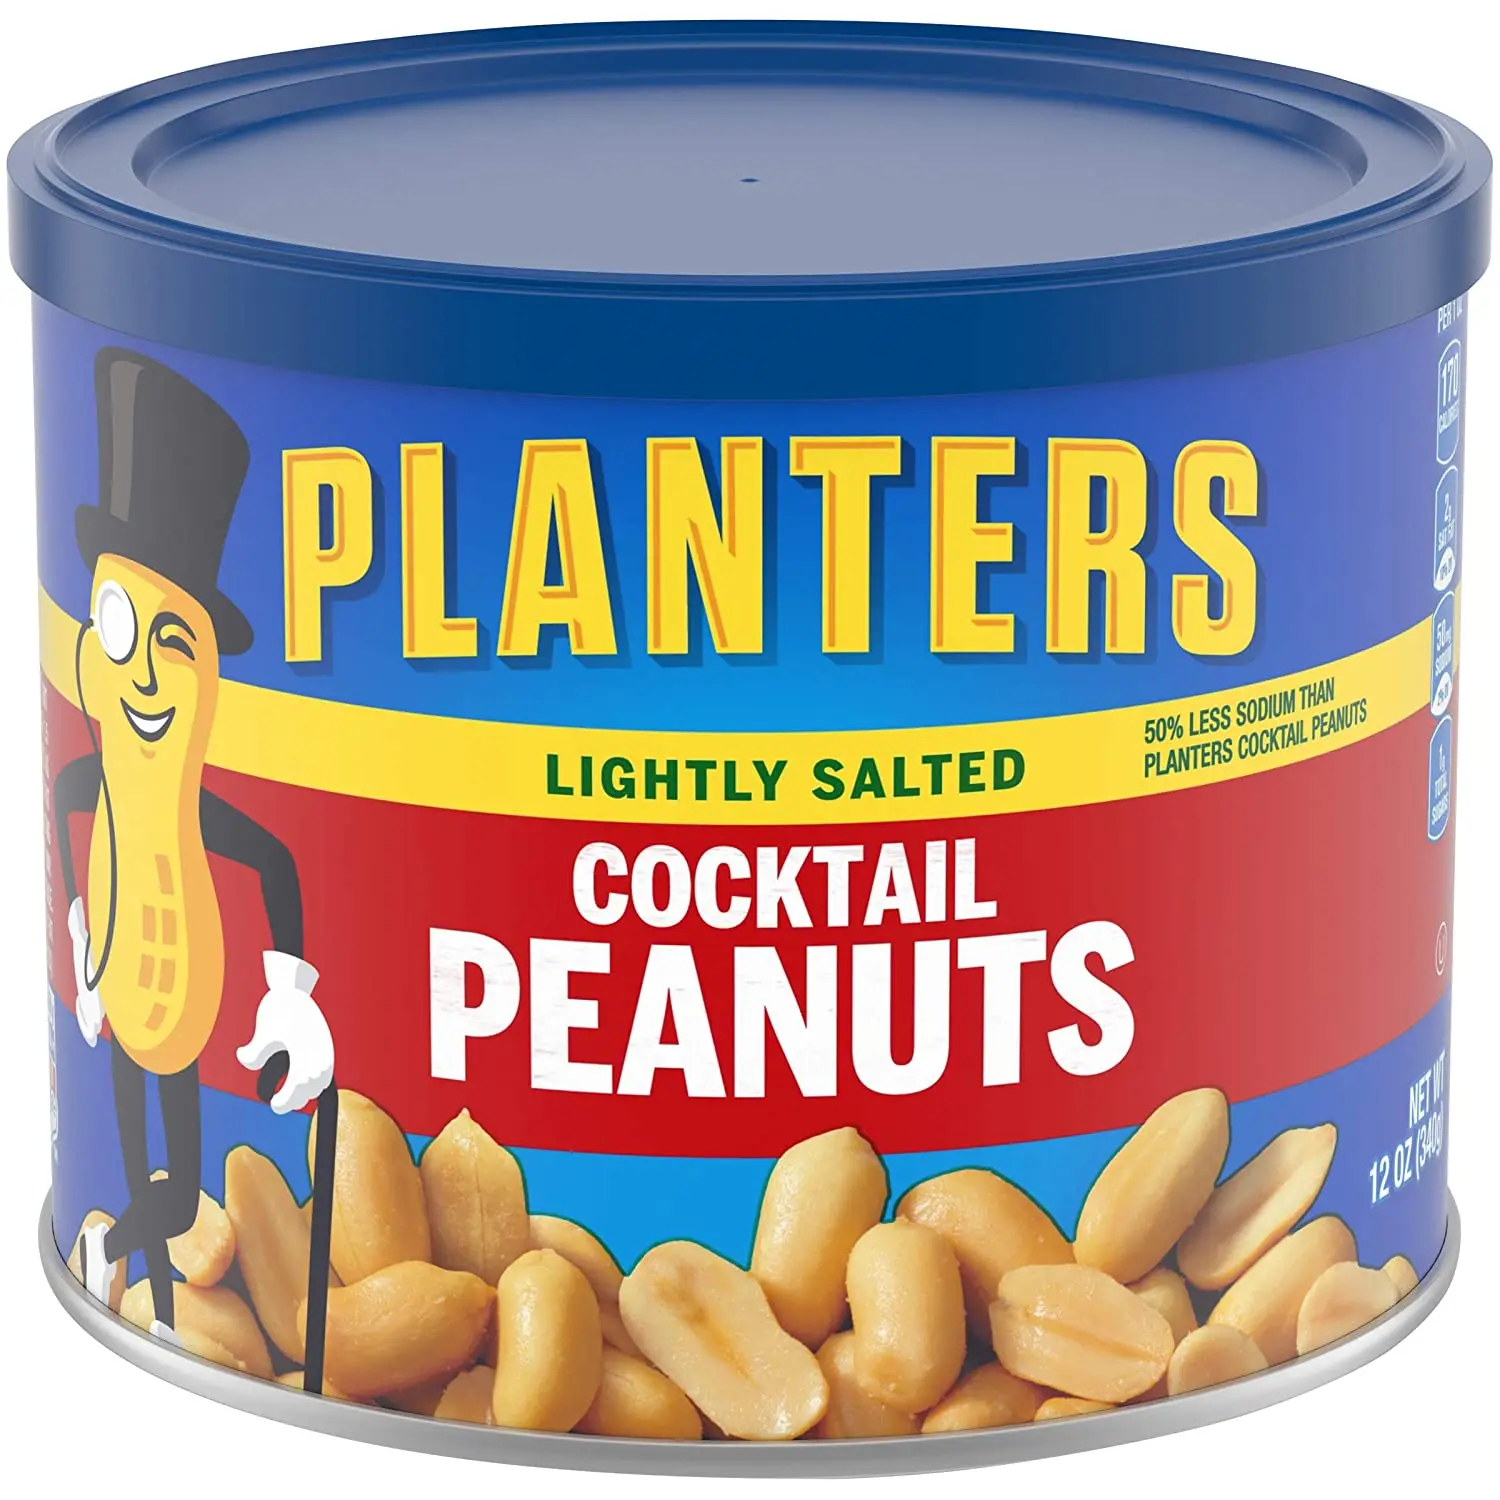 Planters Cocktail Peanuts 12 oz Can (Pack of 6) (11000003307054)